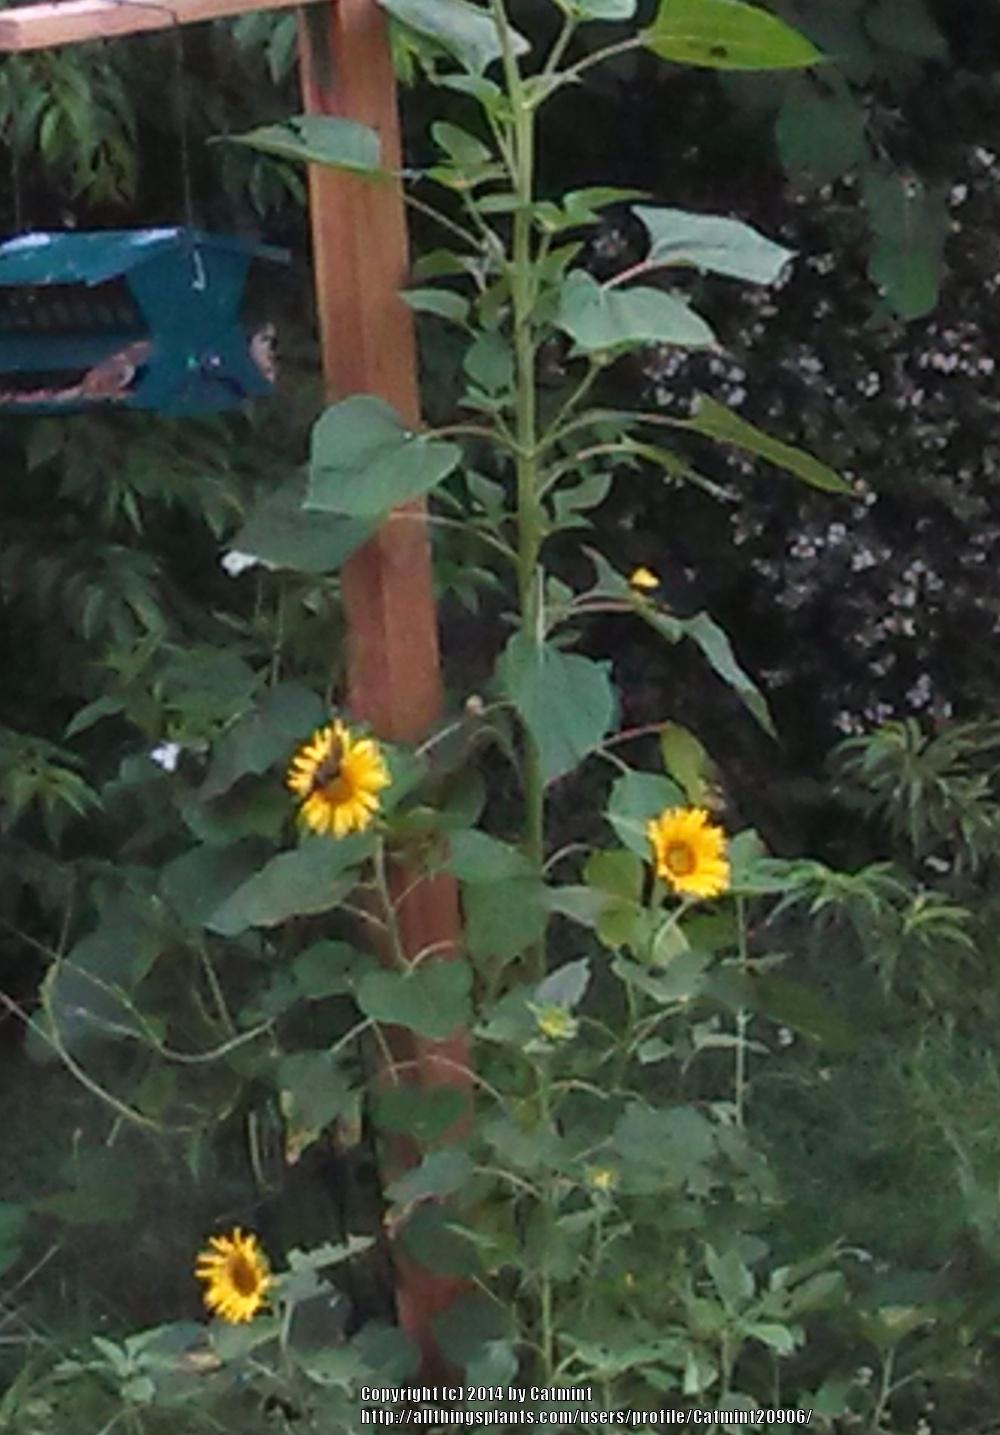 Photo of Sunflowers (Helianthus annuus) uploaded by Catmint20906